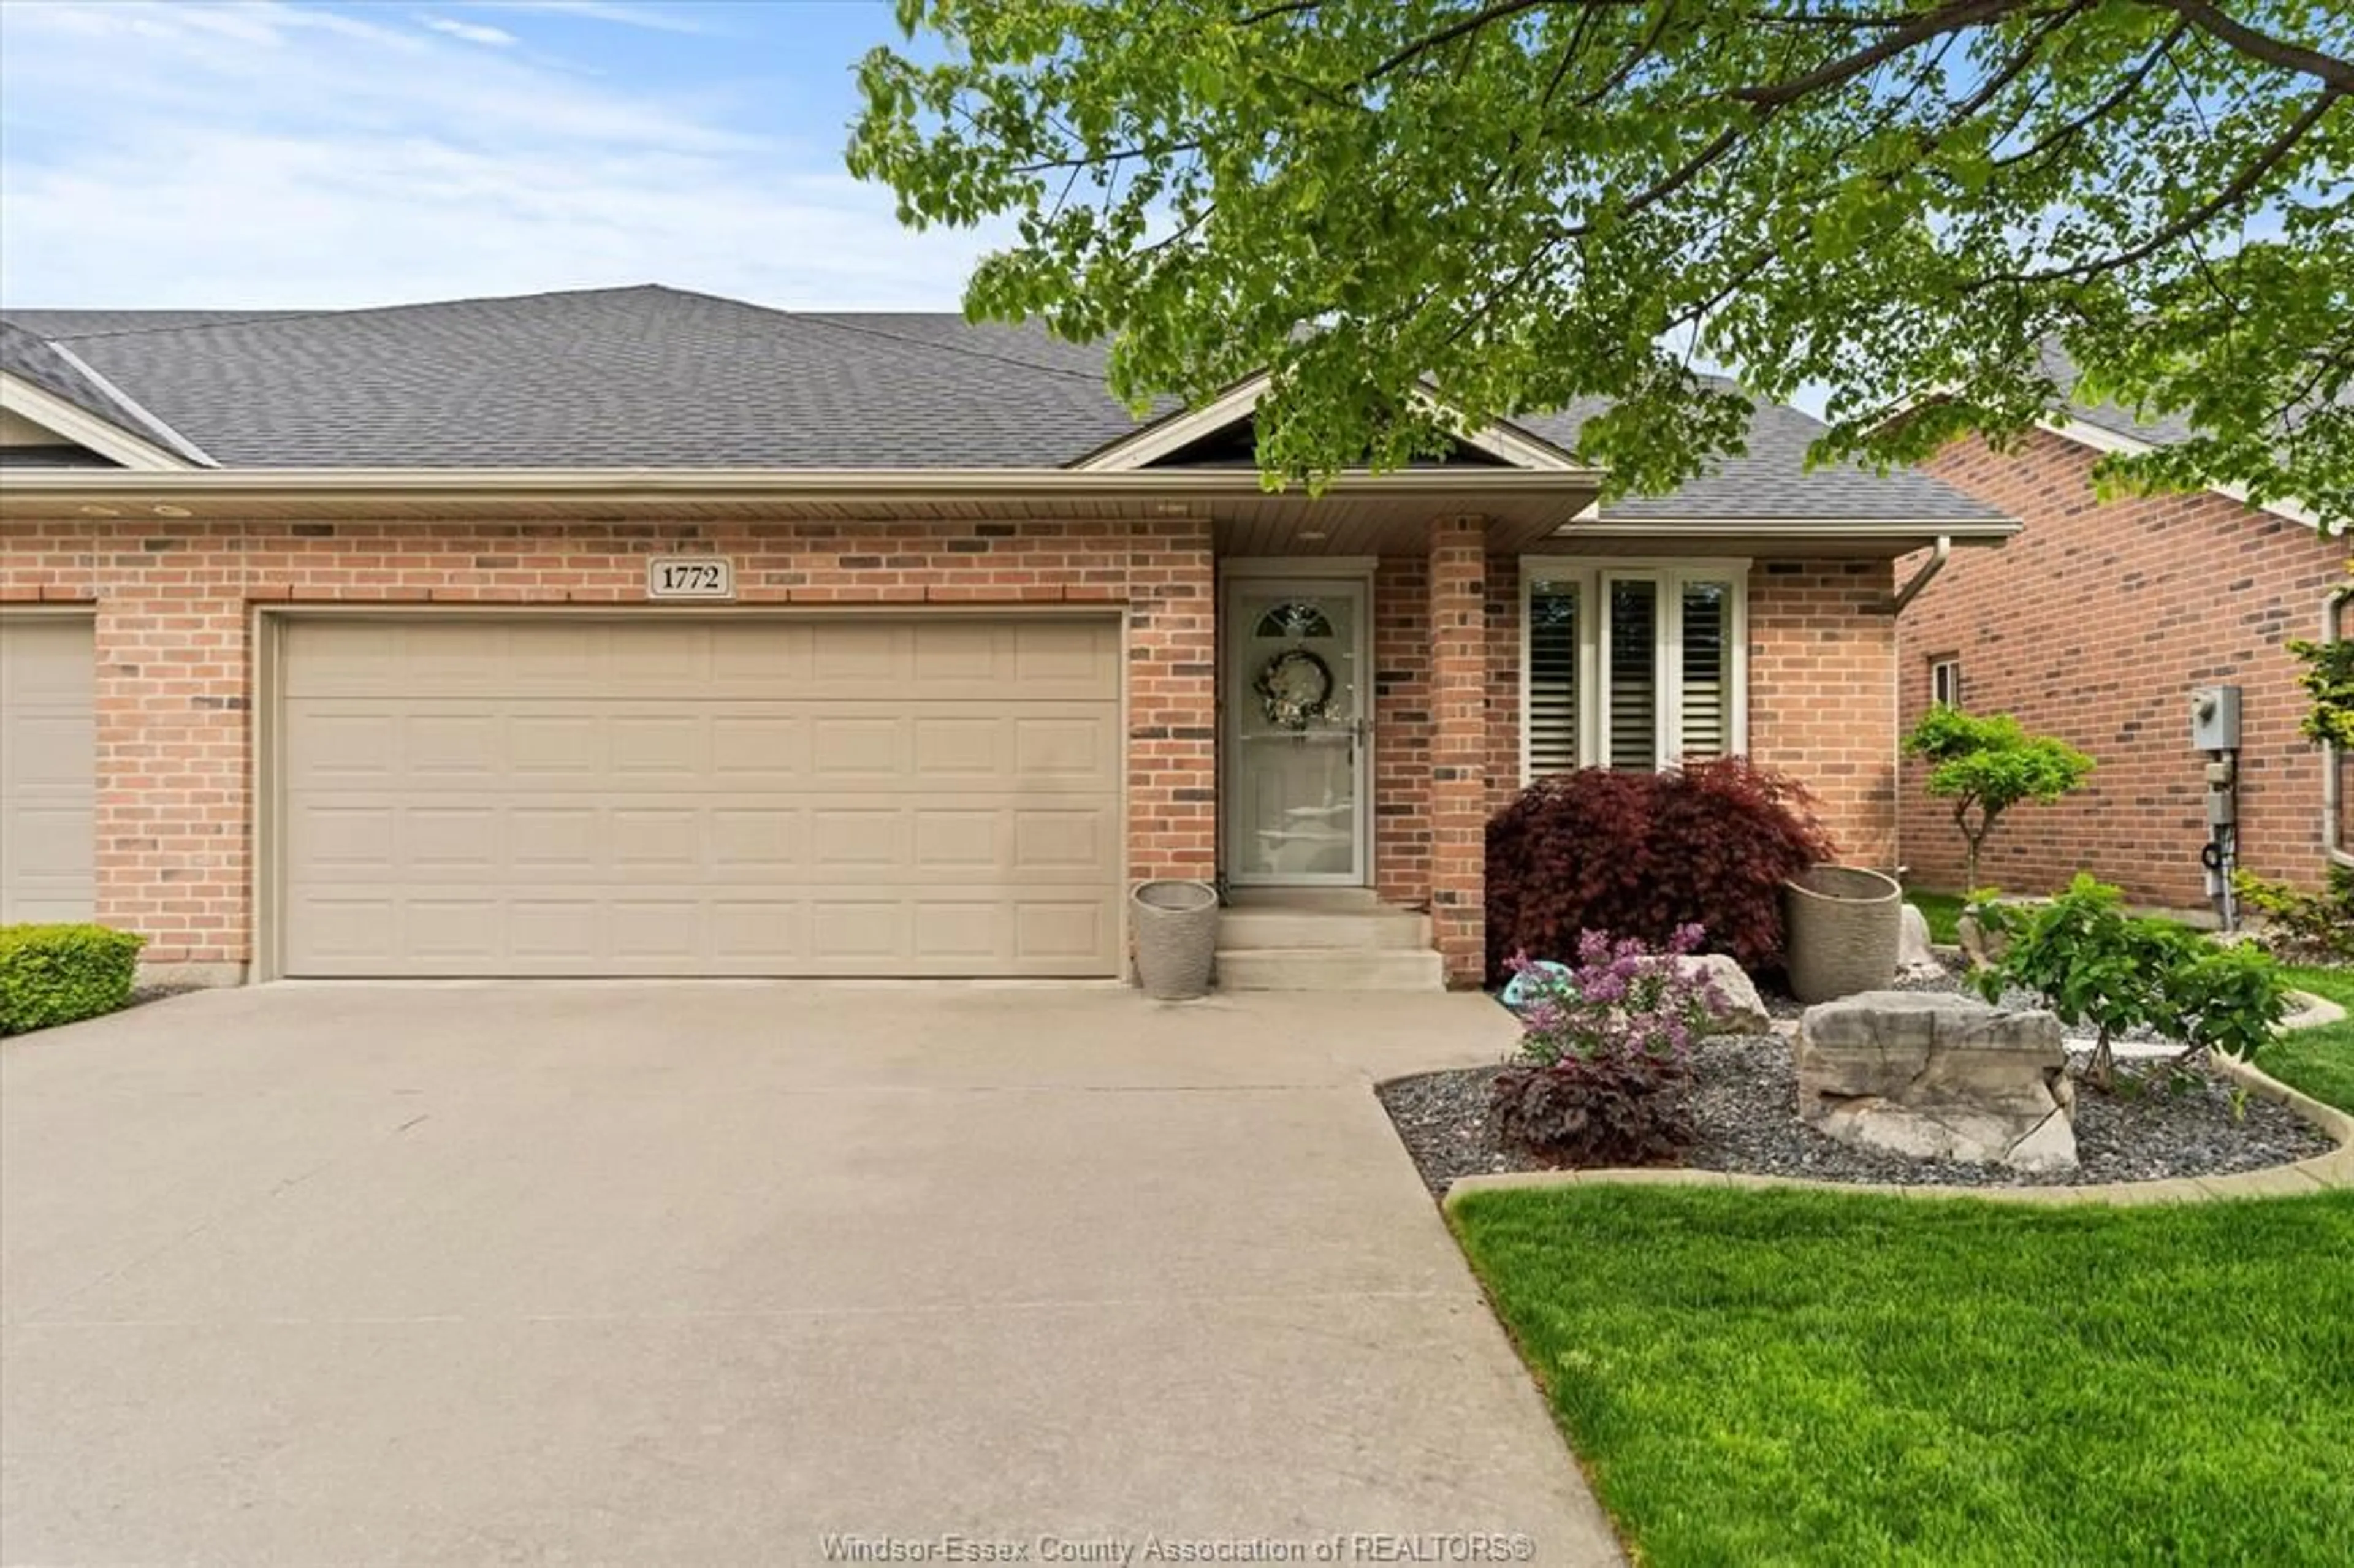 Home with brick exterior material for 1772 VENETIAN Ave, Windsor Ontario N8P 2A1